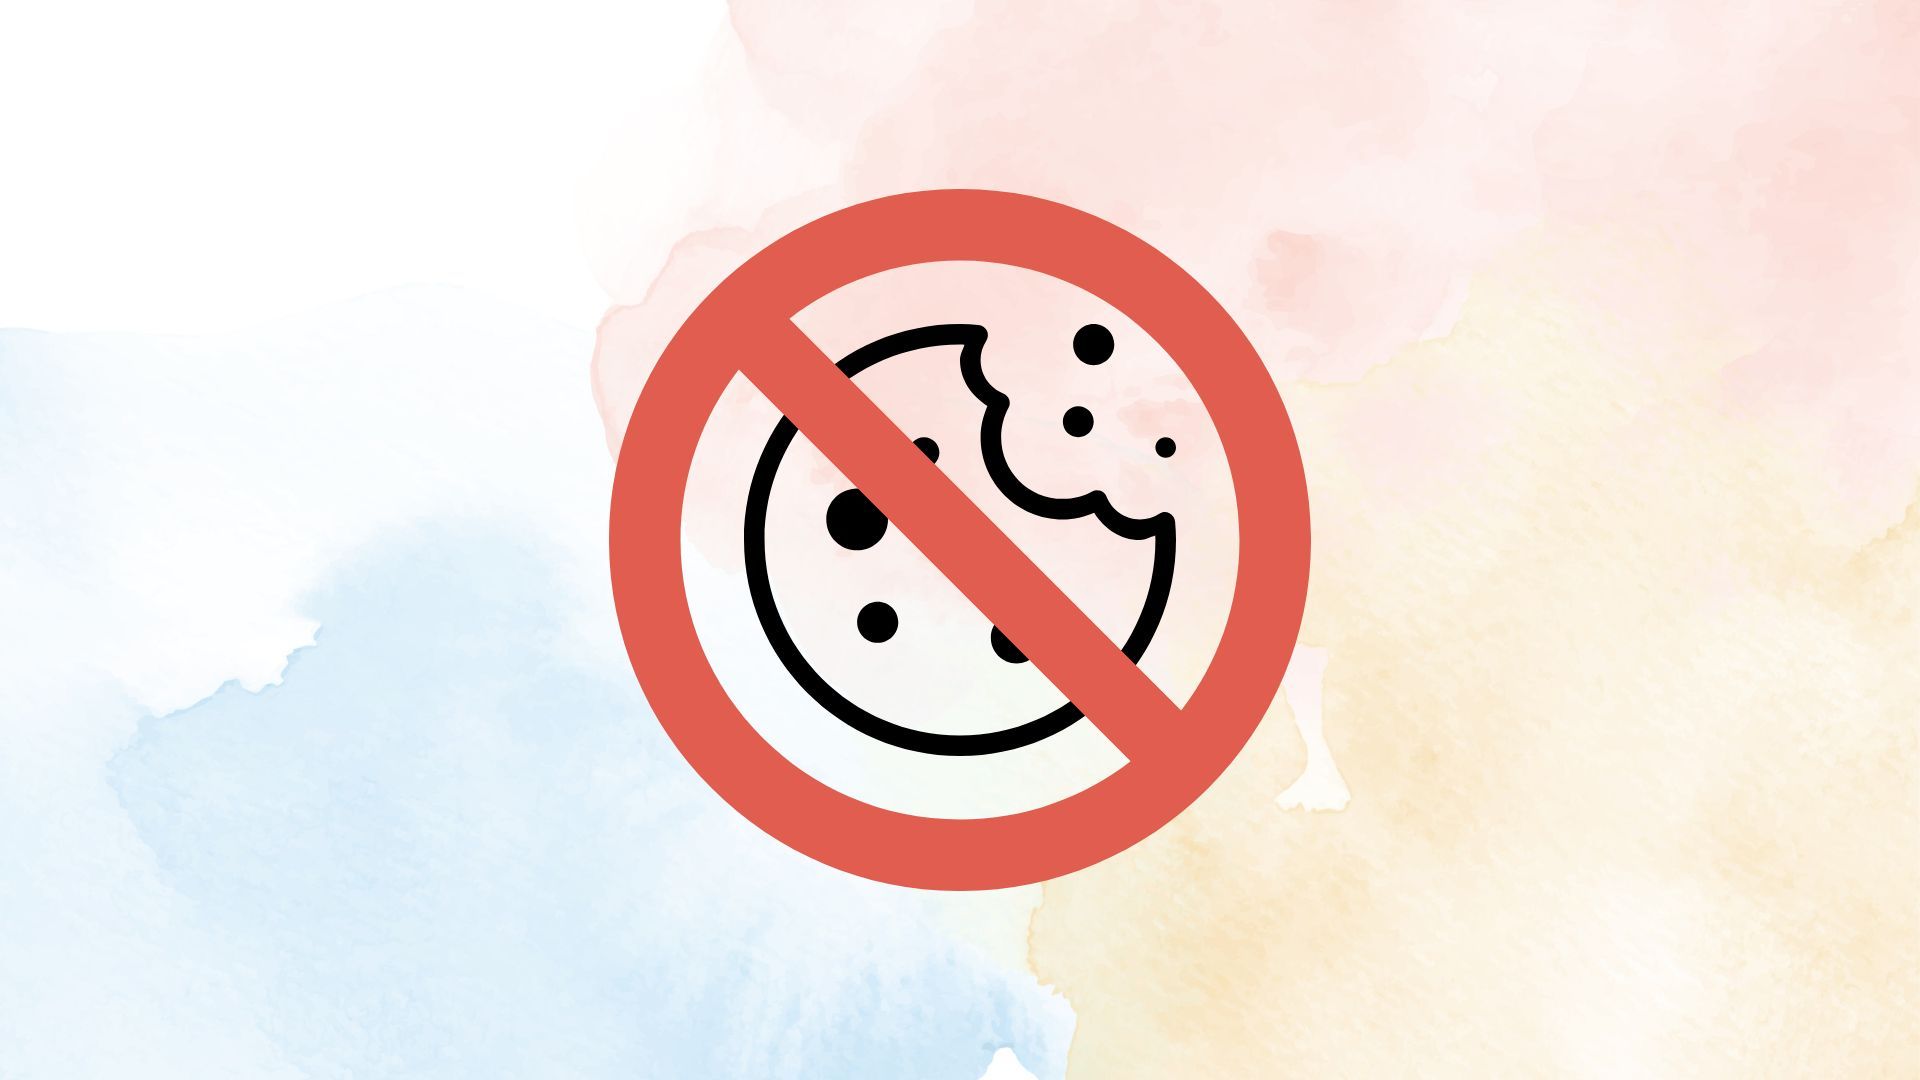 Outline of a cookie that was bitten into, and a red "not allowed" symbol on top of it. The background is white with some light blue, yellow and red watercolor drops.